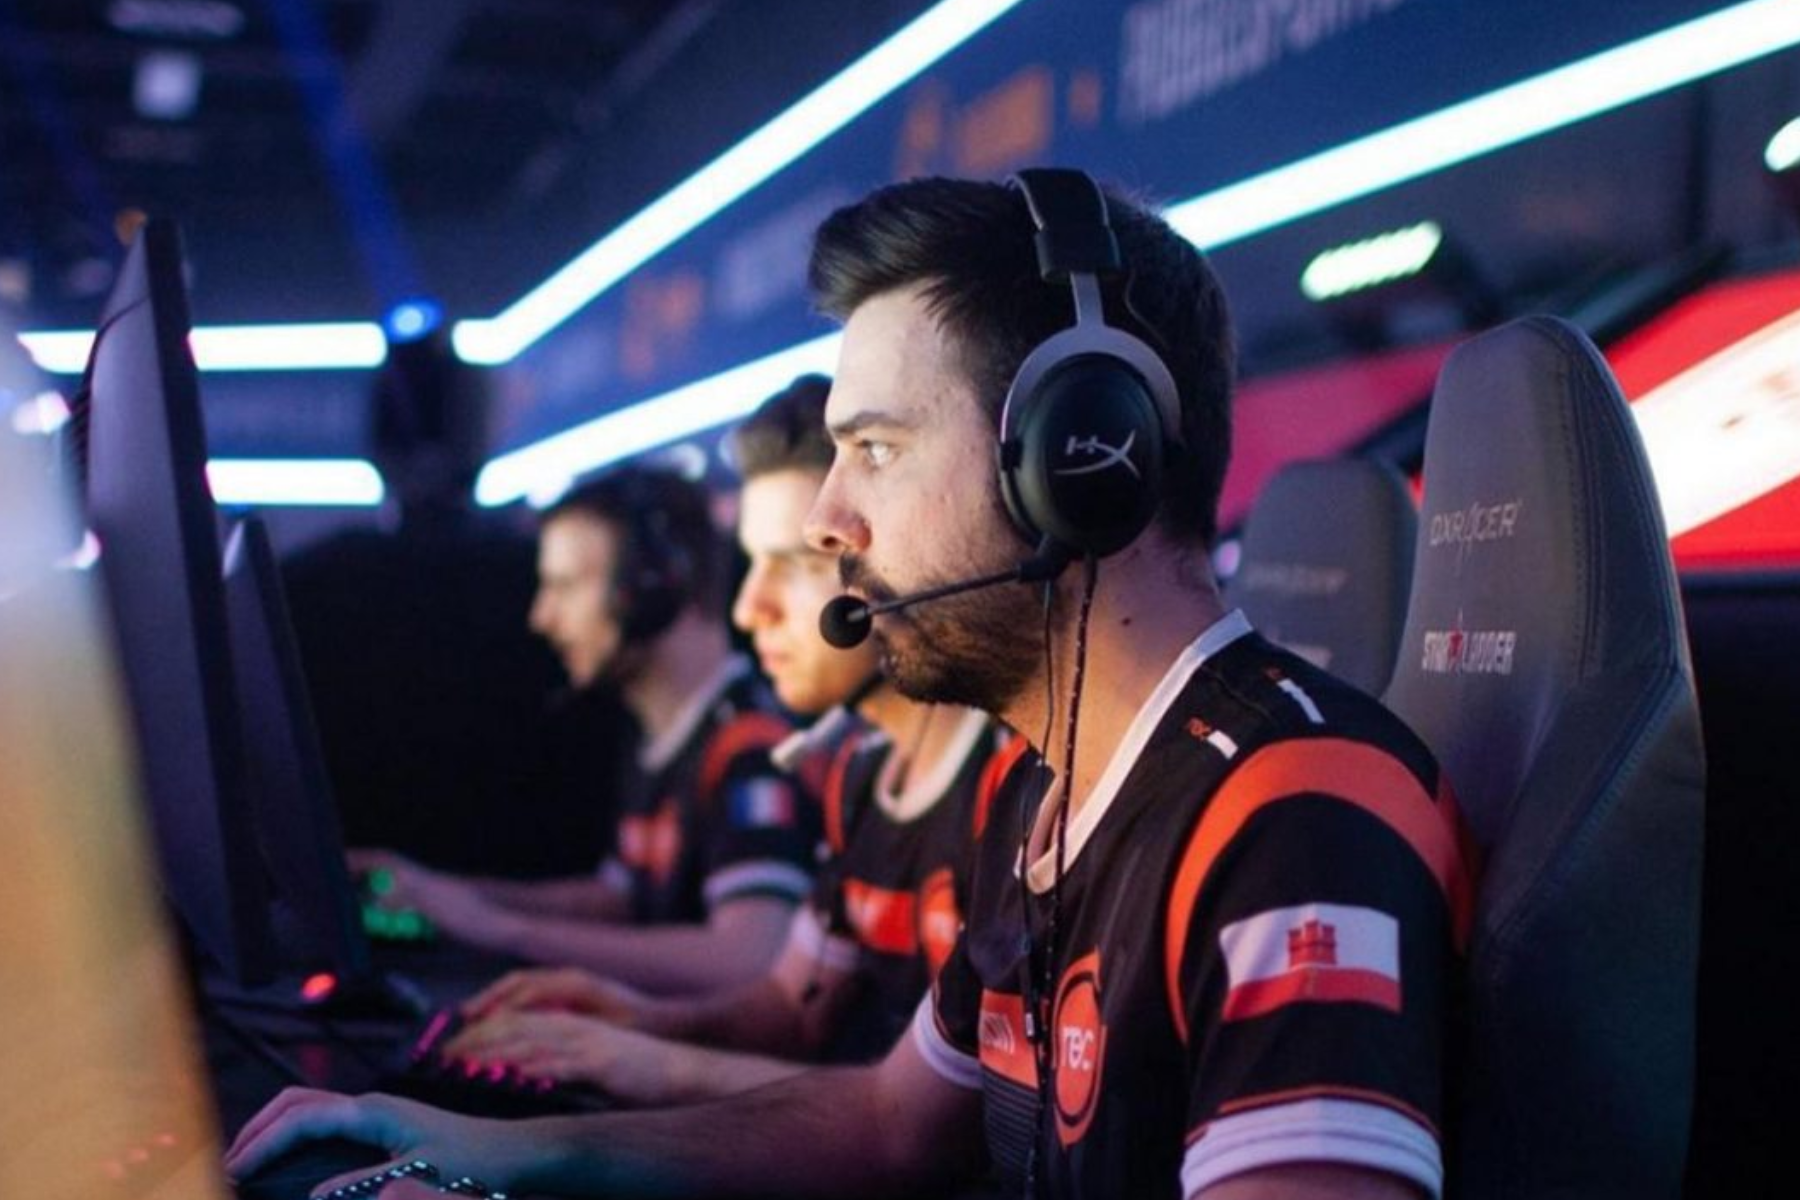 A man wearing earbuds and a headphone while playing with his teammates